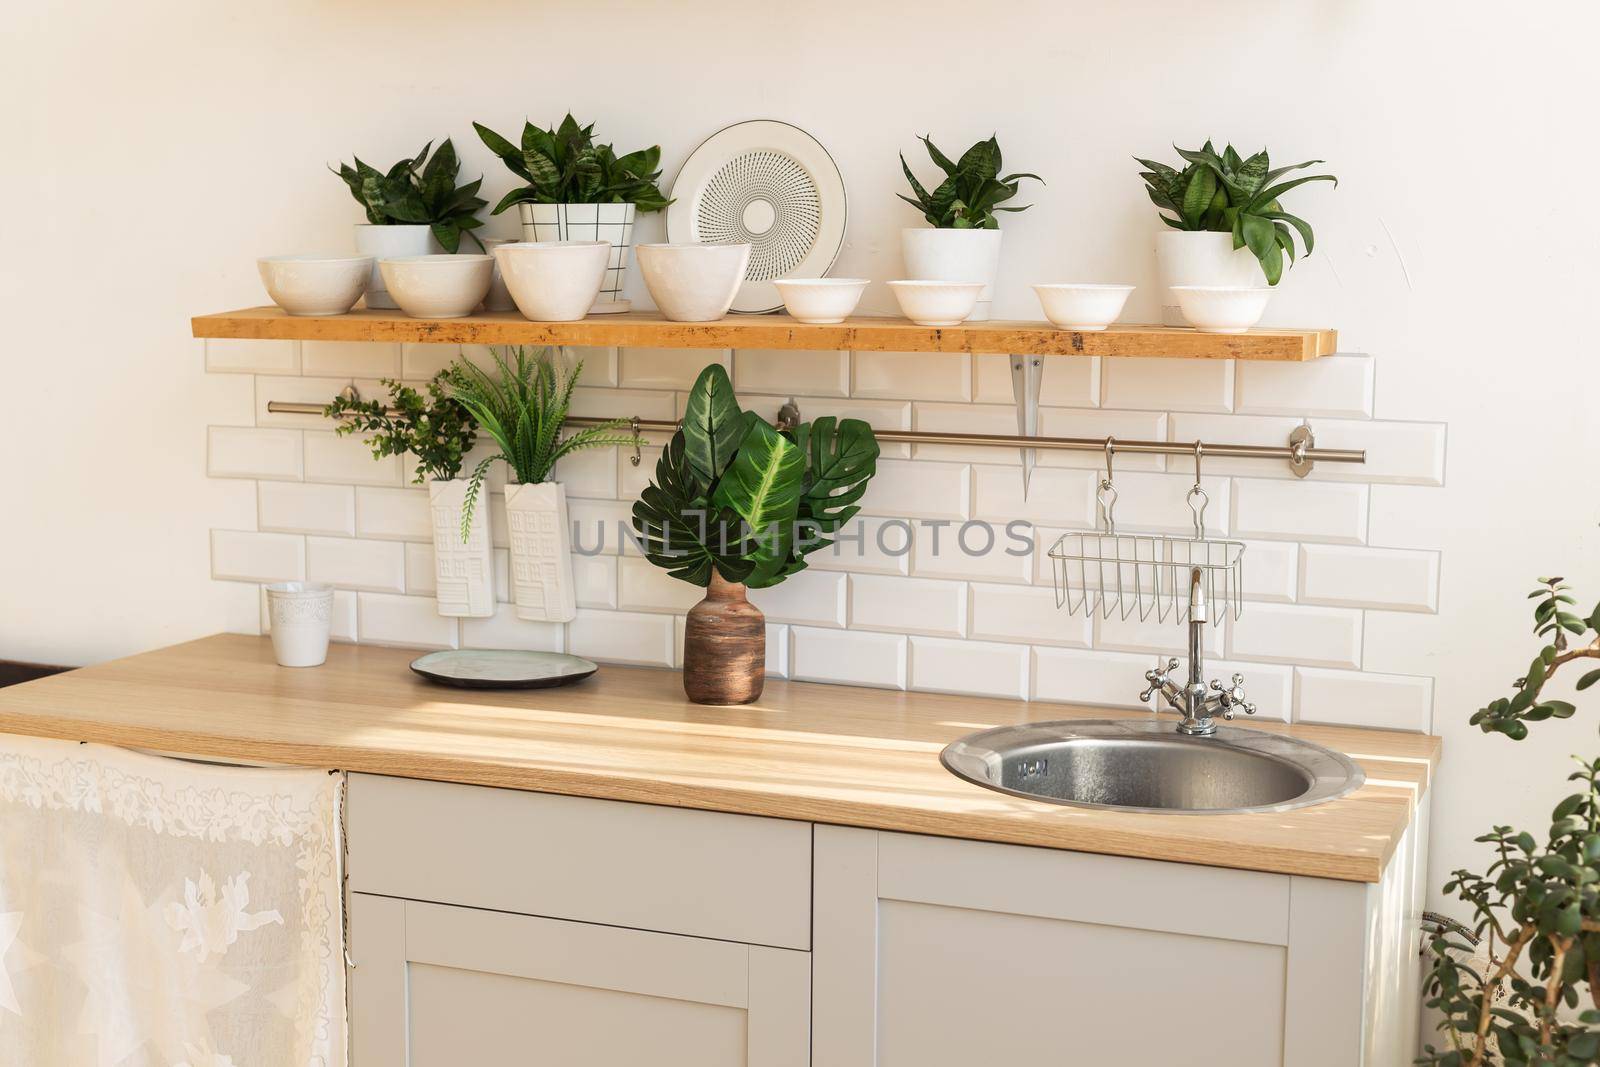 Stylish scandinavian open space with kitchen accessories and plants. by Satura86